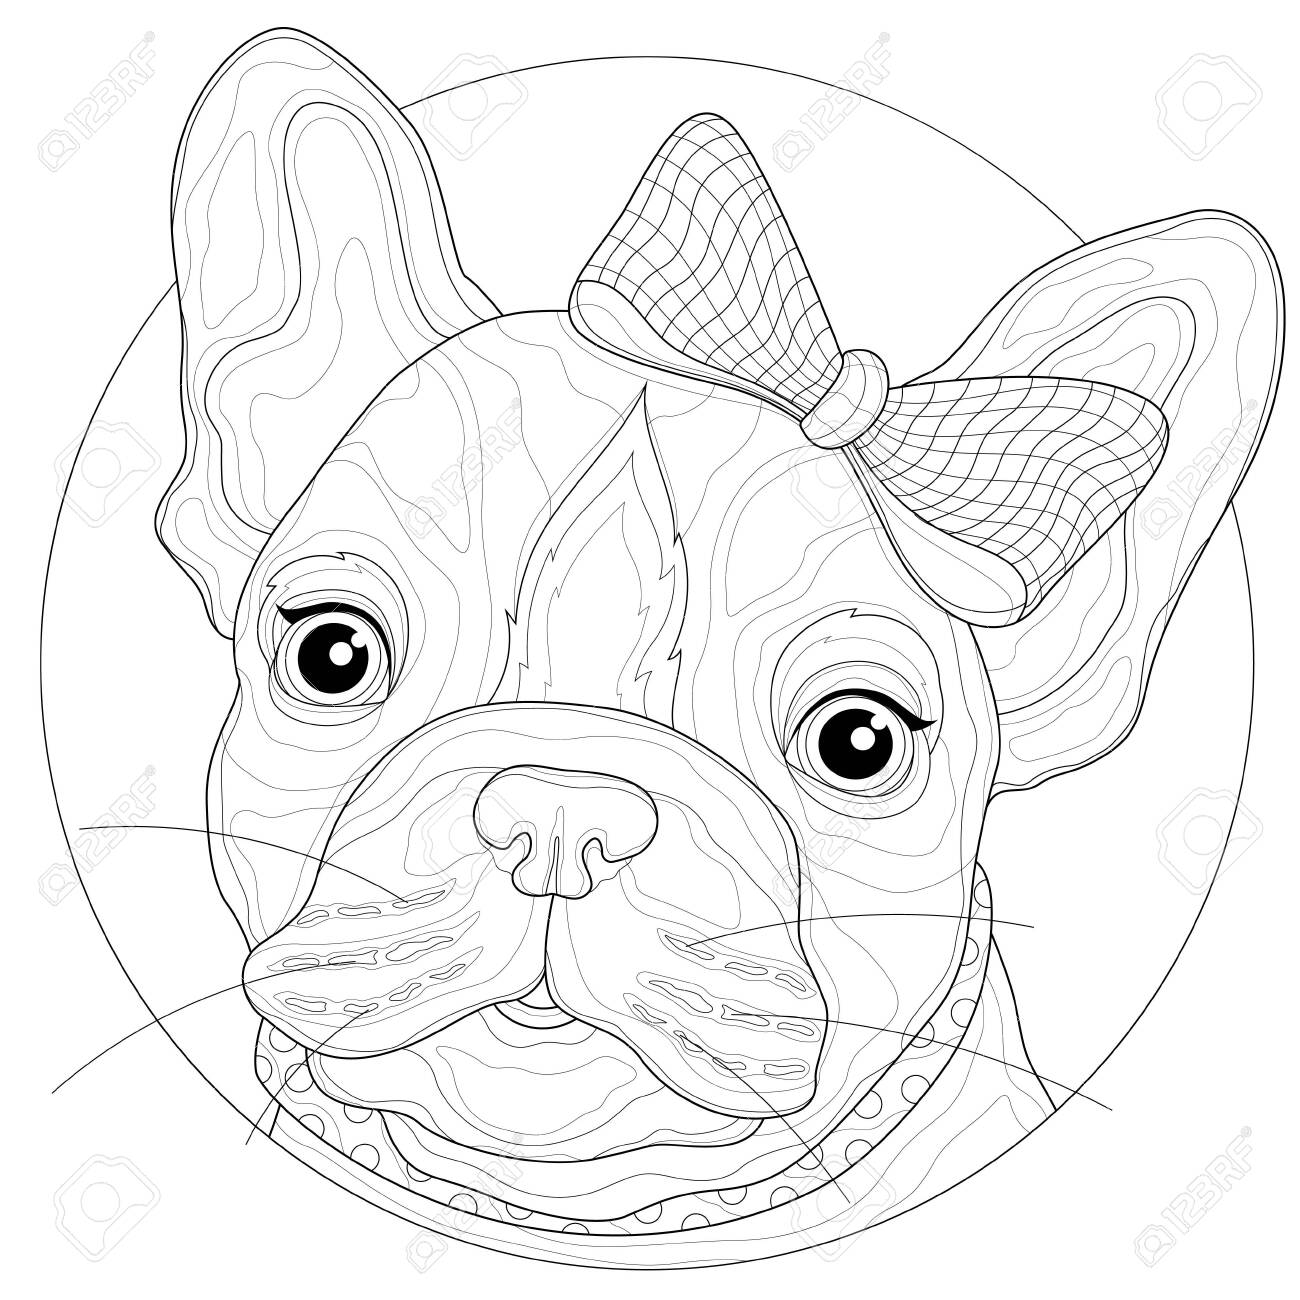 French bulldog with a bow on his head coloring book antistress for children and adults illustration isolated on white backgroundblack and white drawingzen